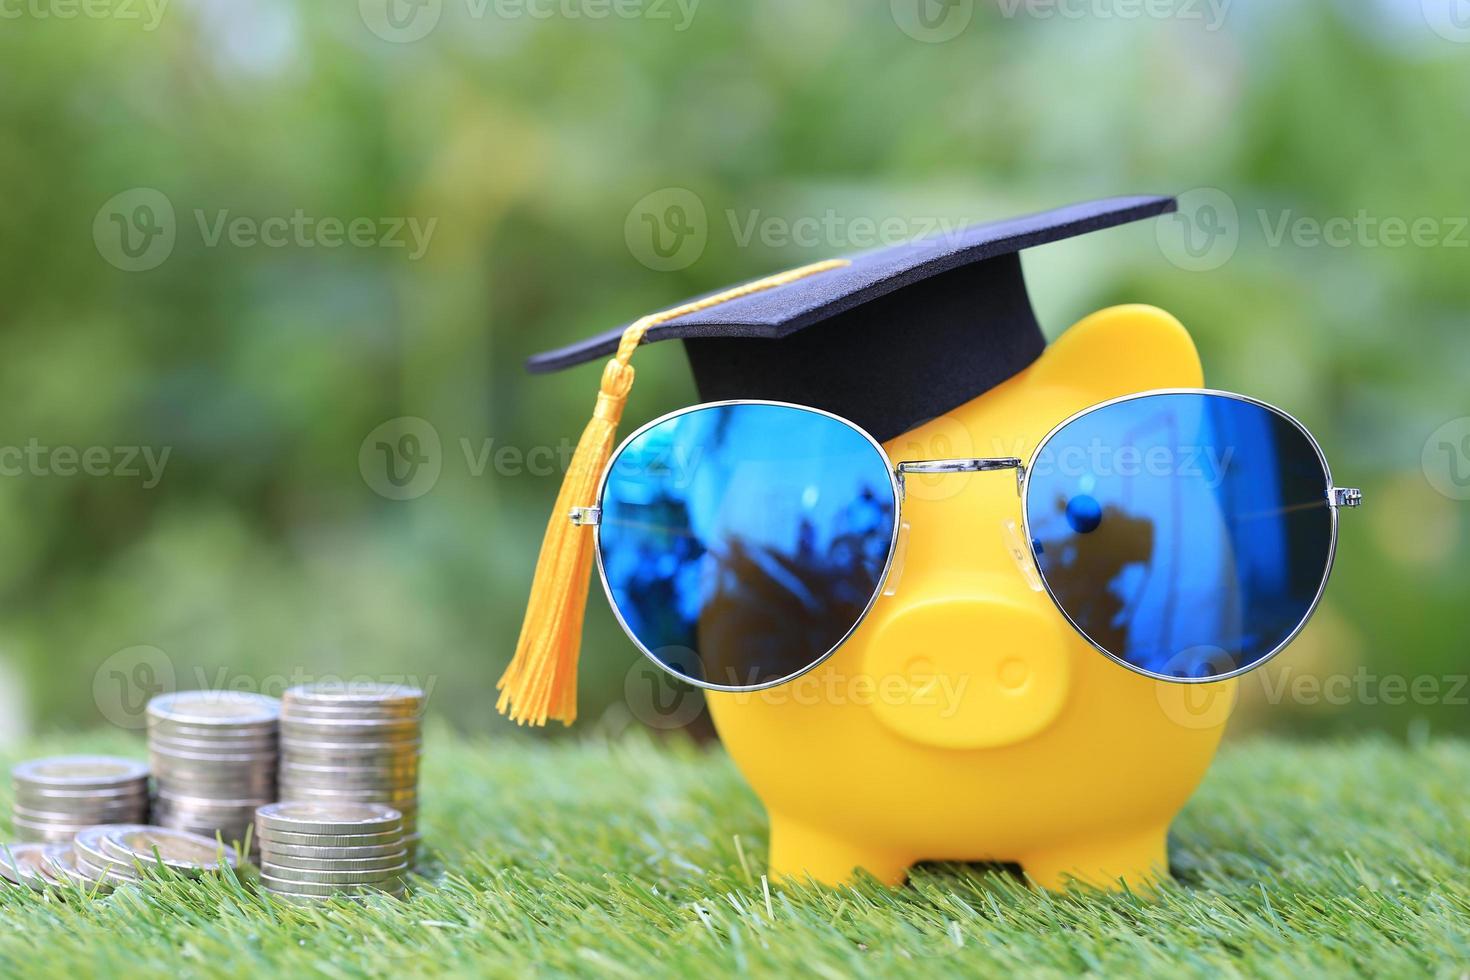 Graduation hat on a golden piggy bank with sunglasses and a stack of coins on a natural green background, saving money for education concept photo